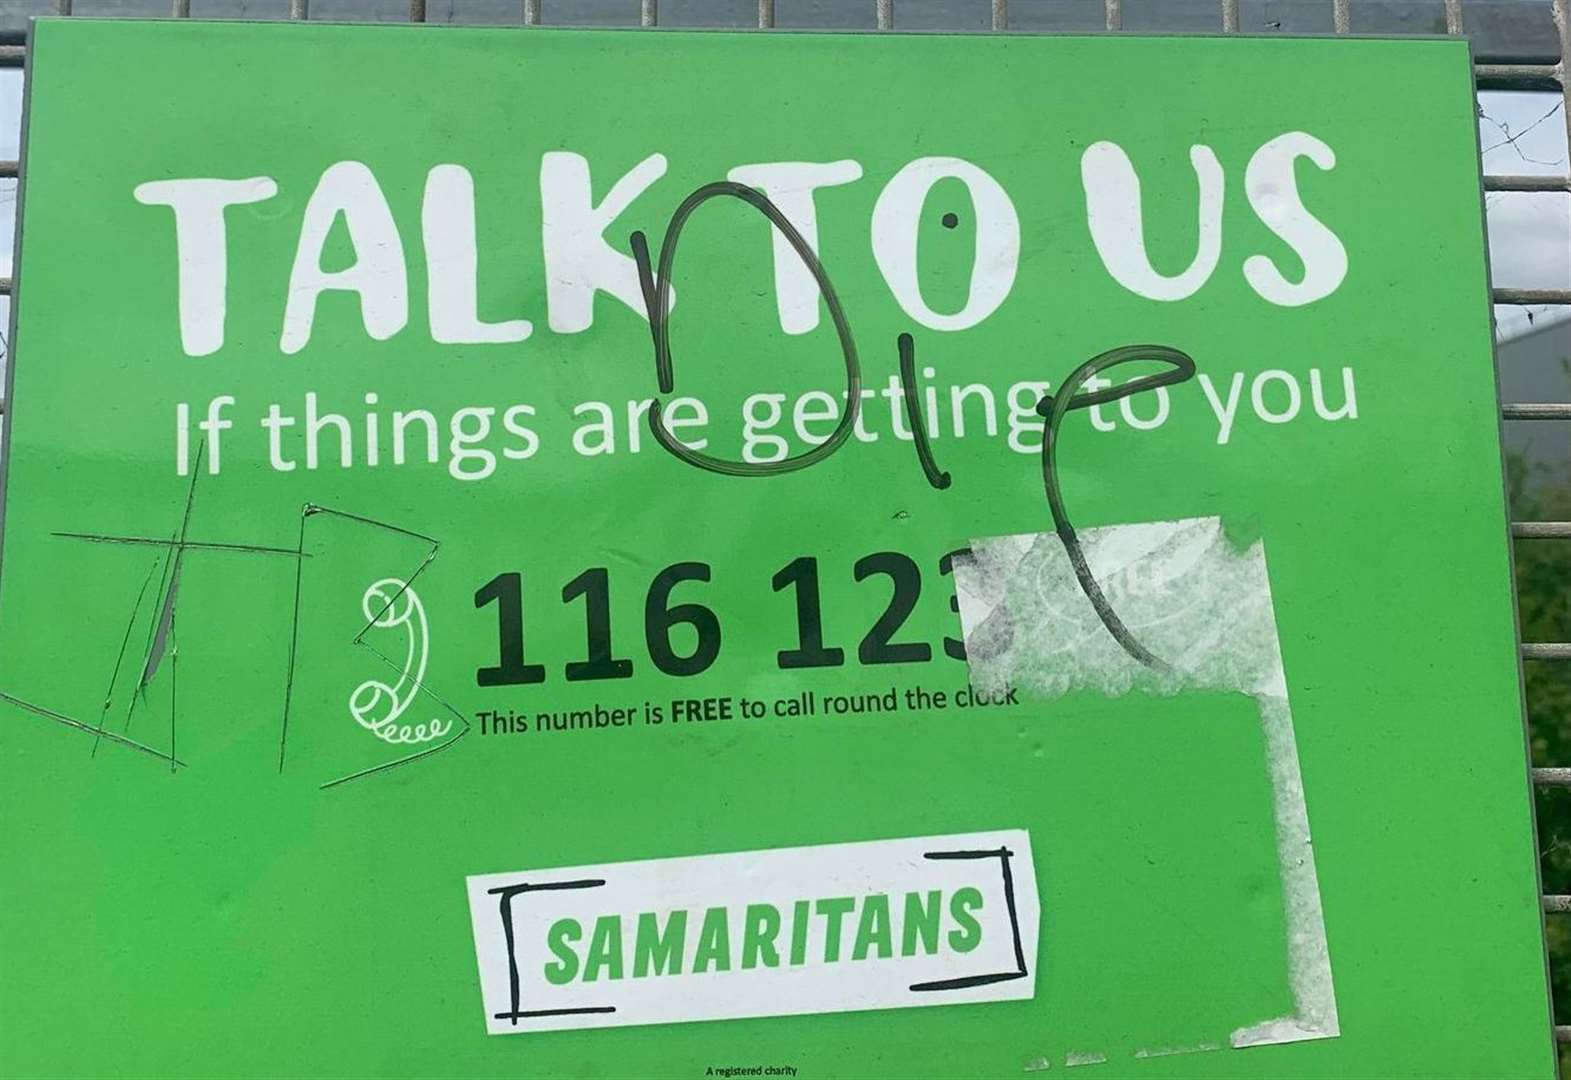 Woman's disgust at offensive words on Samaritans posters 